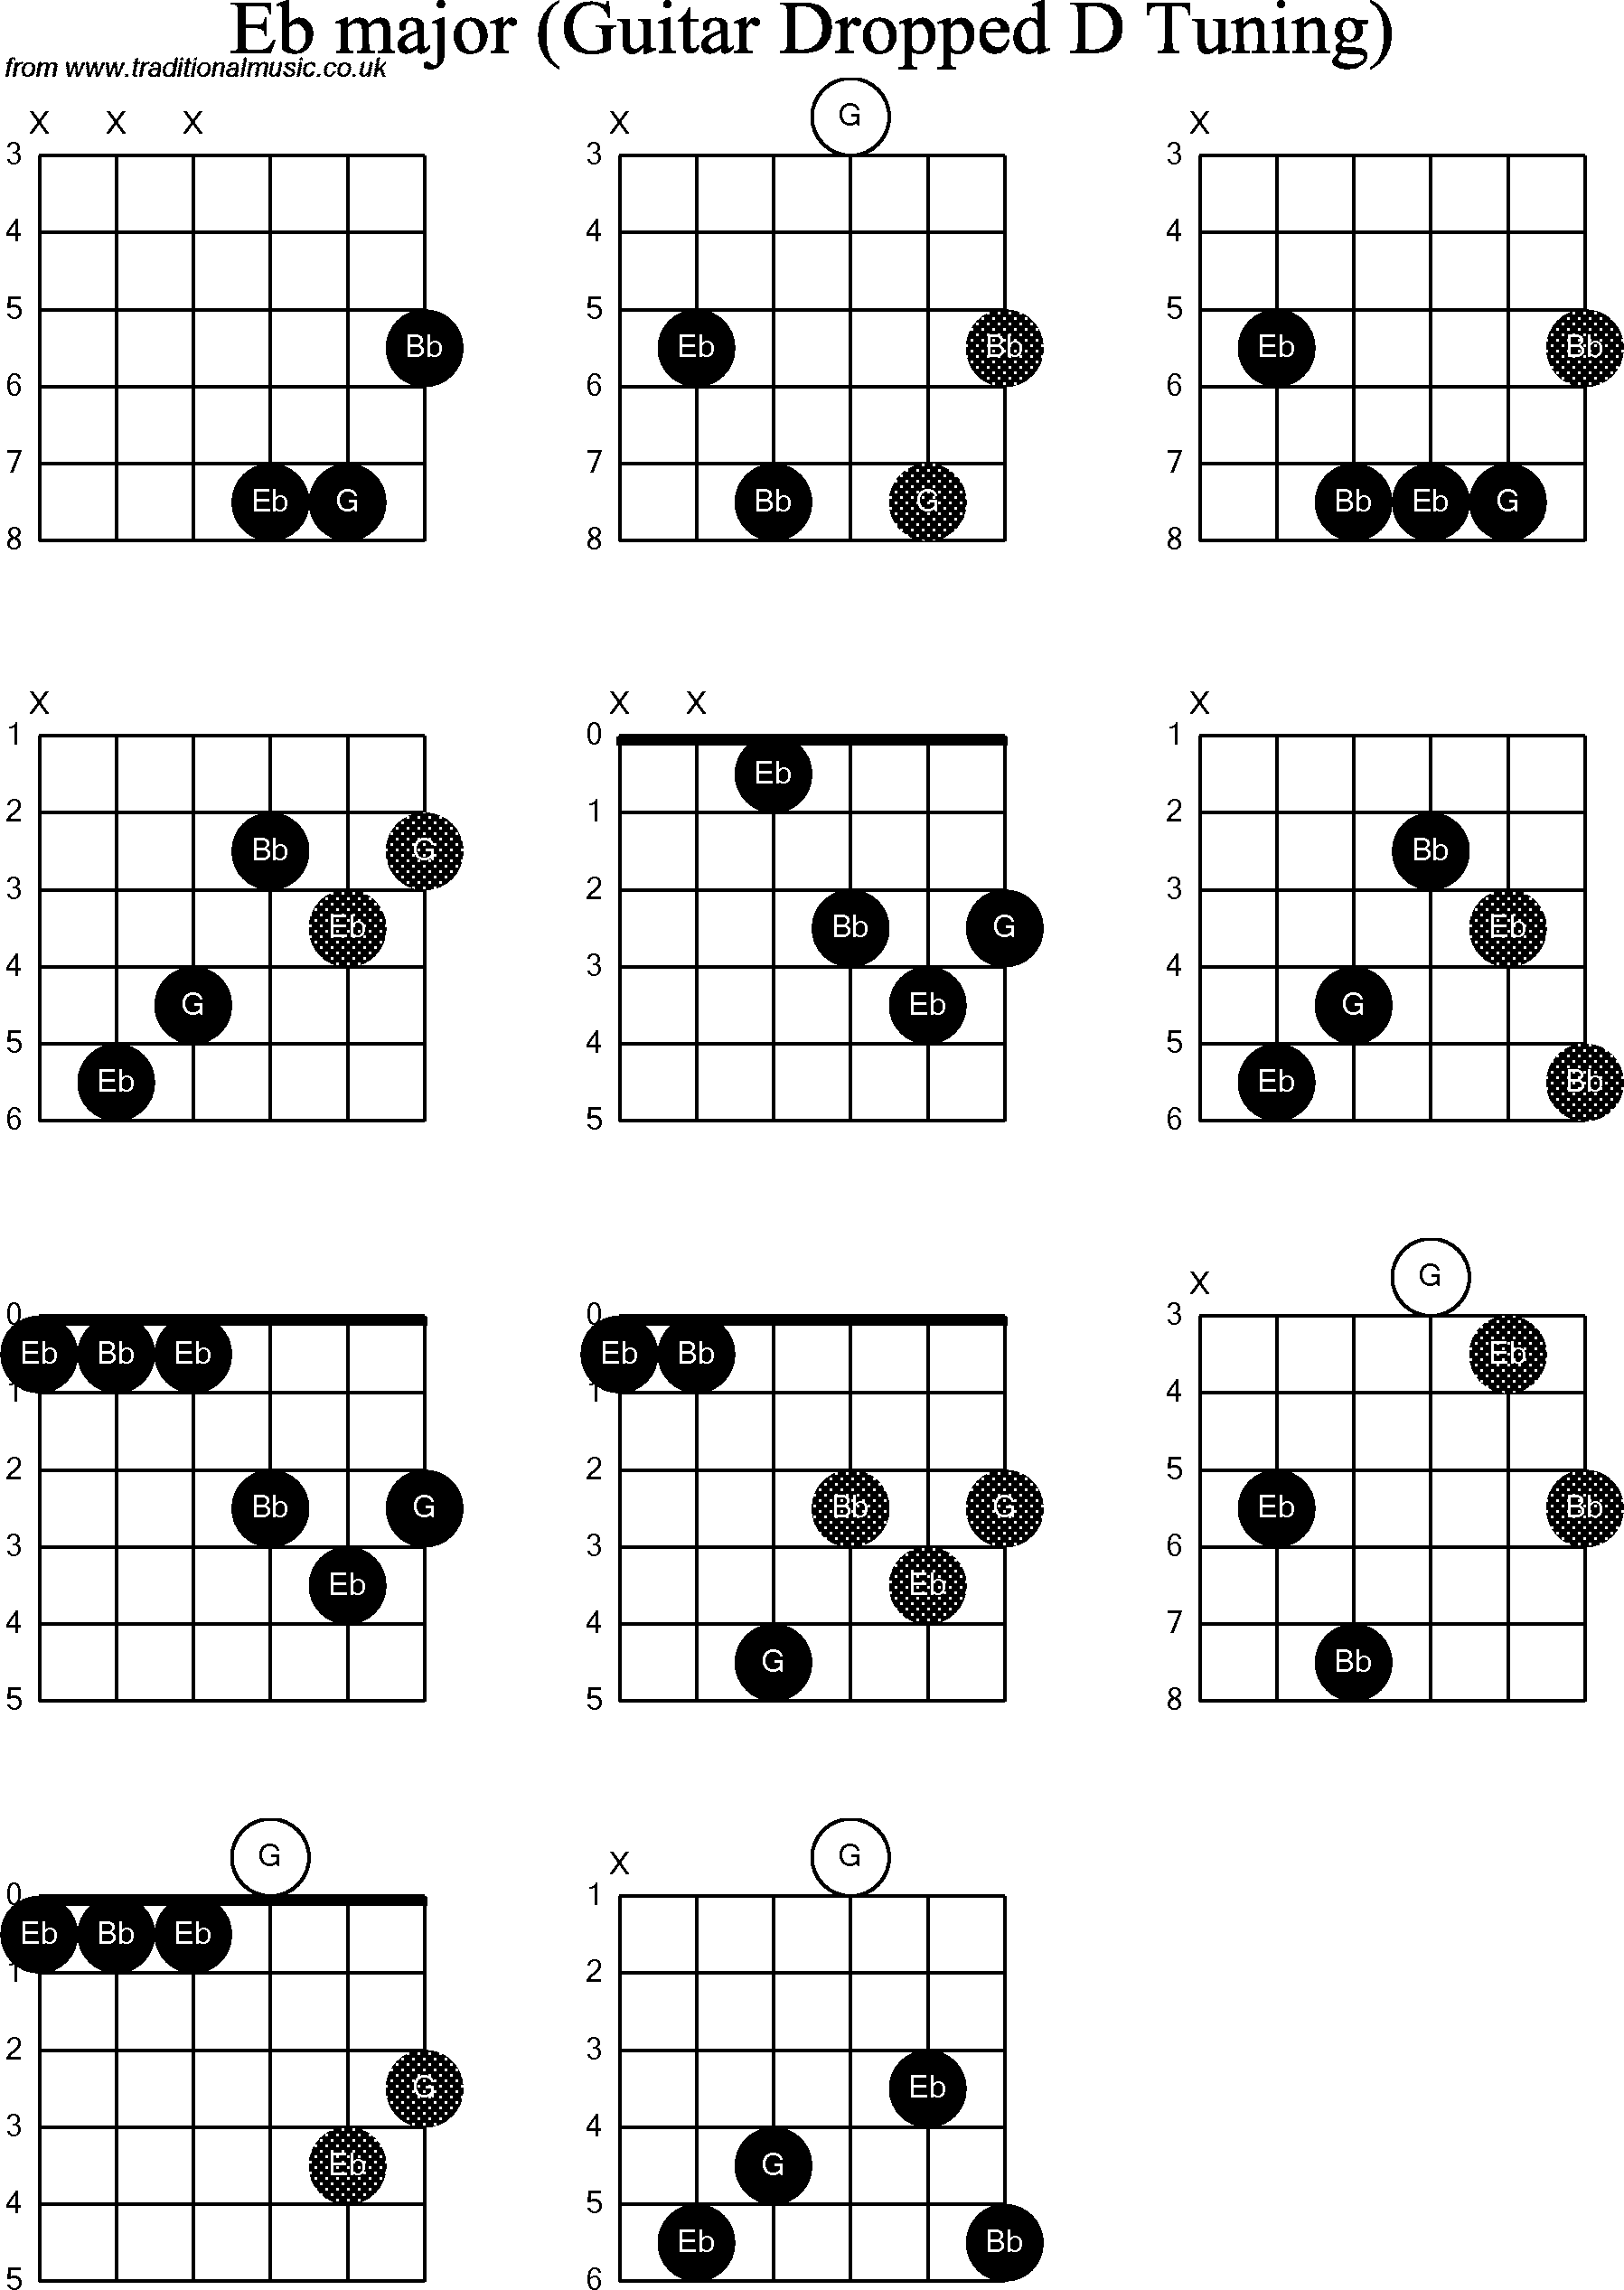 Chord diagrams for dropped D Guitar(DADGBE), Eb